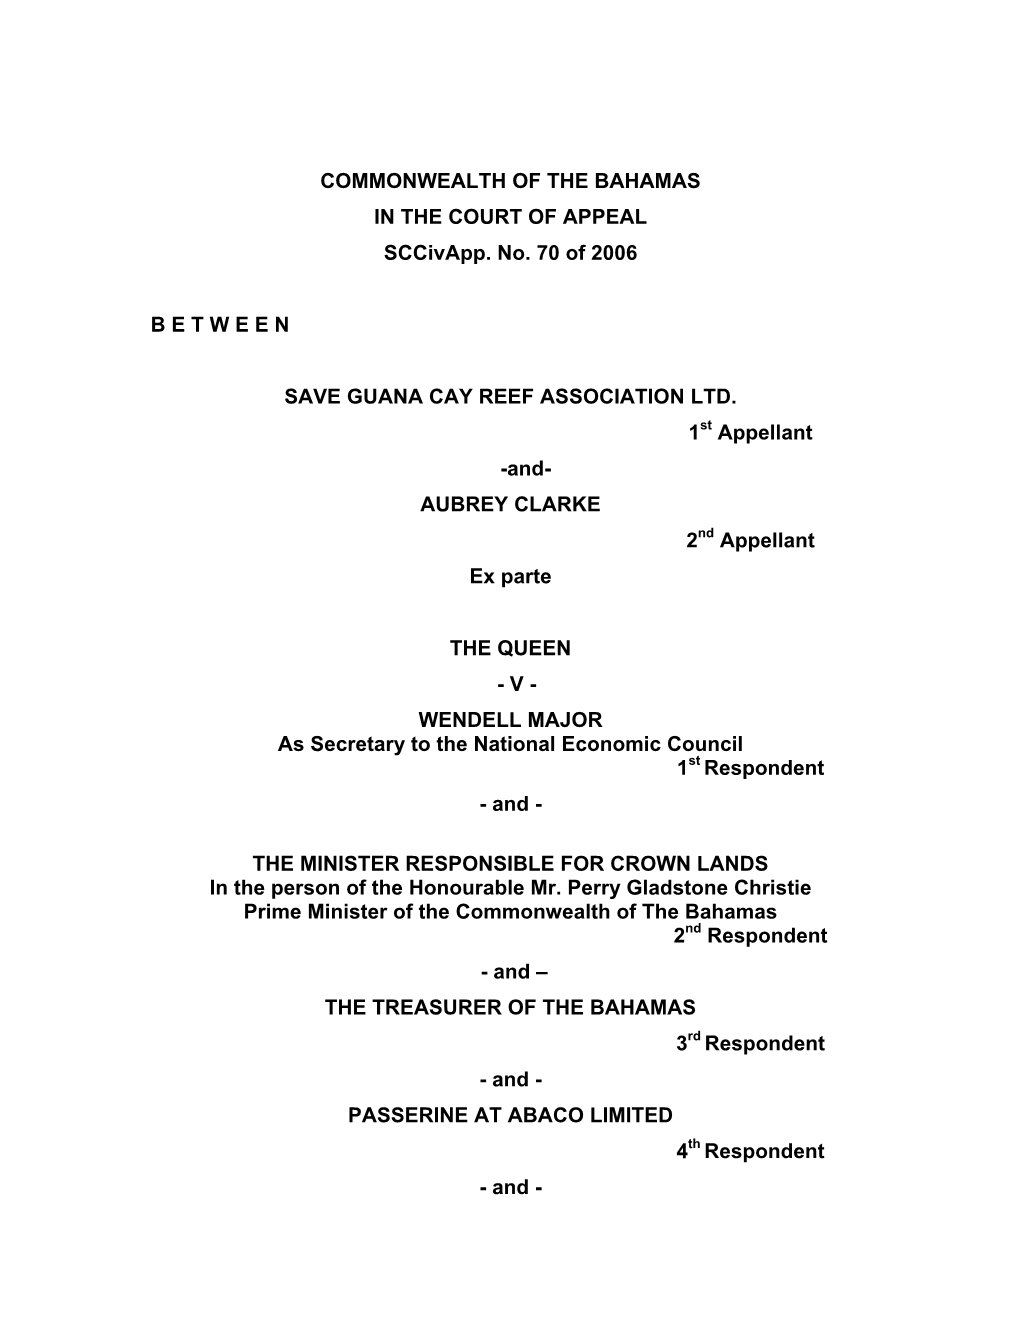 COMMONWEALTH of the BAHAMAS in the COURT of APPEAL Sccivapp